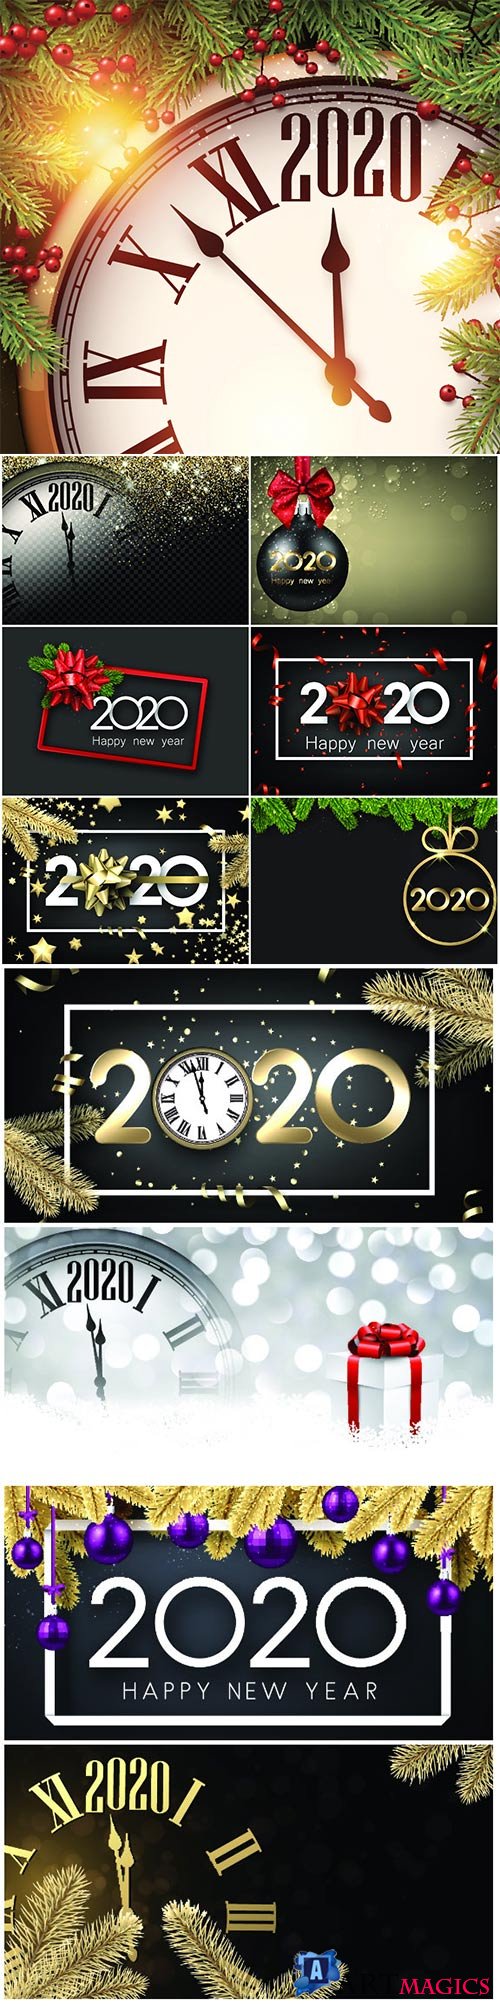 Happy New Year 2020 card with fir branches and Christmas balls